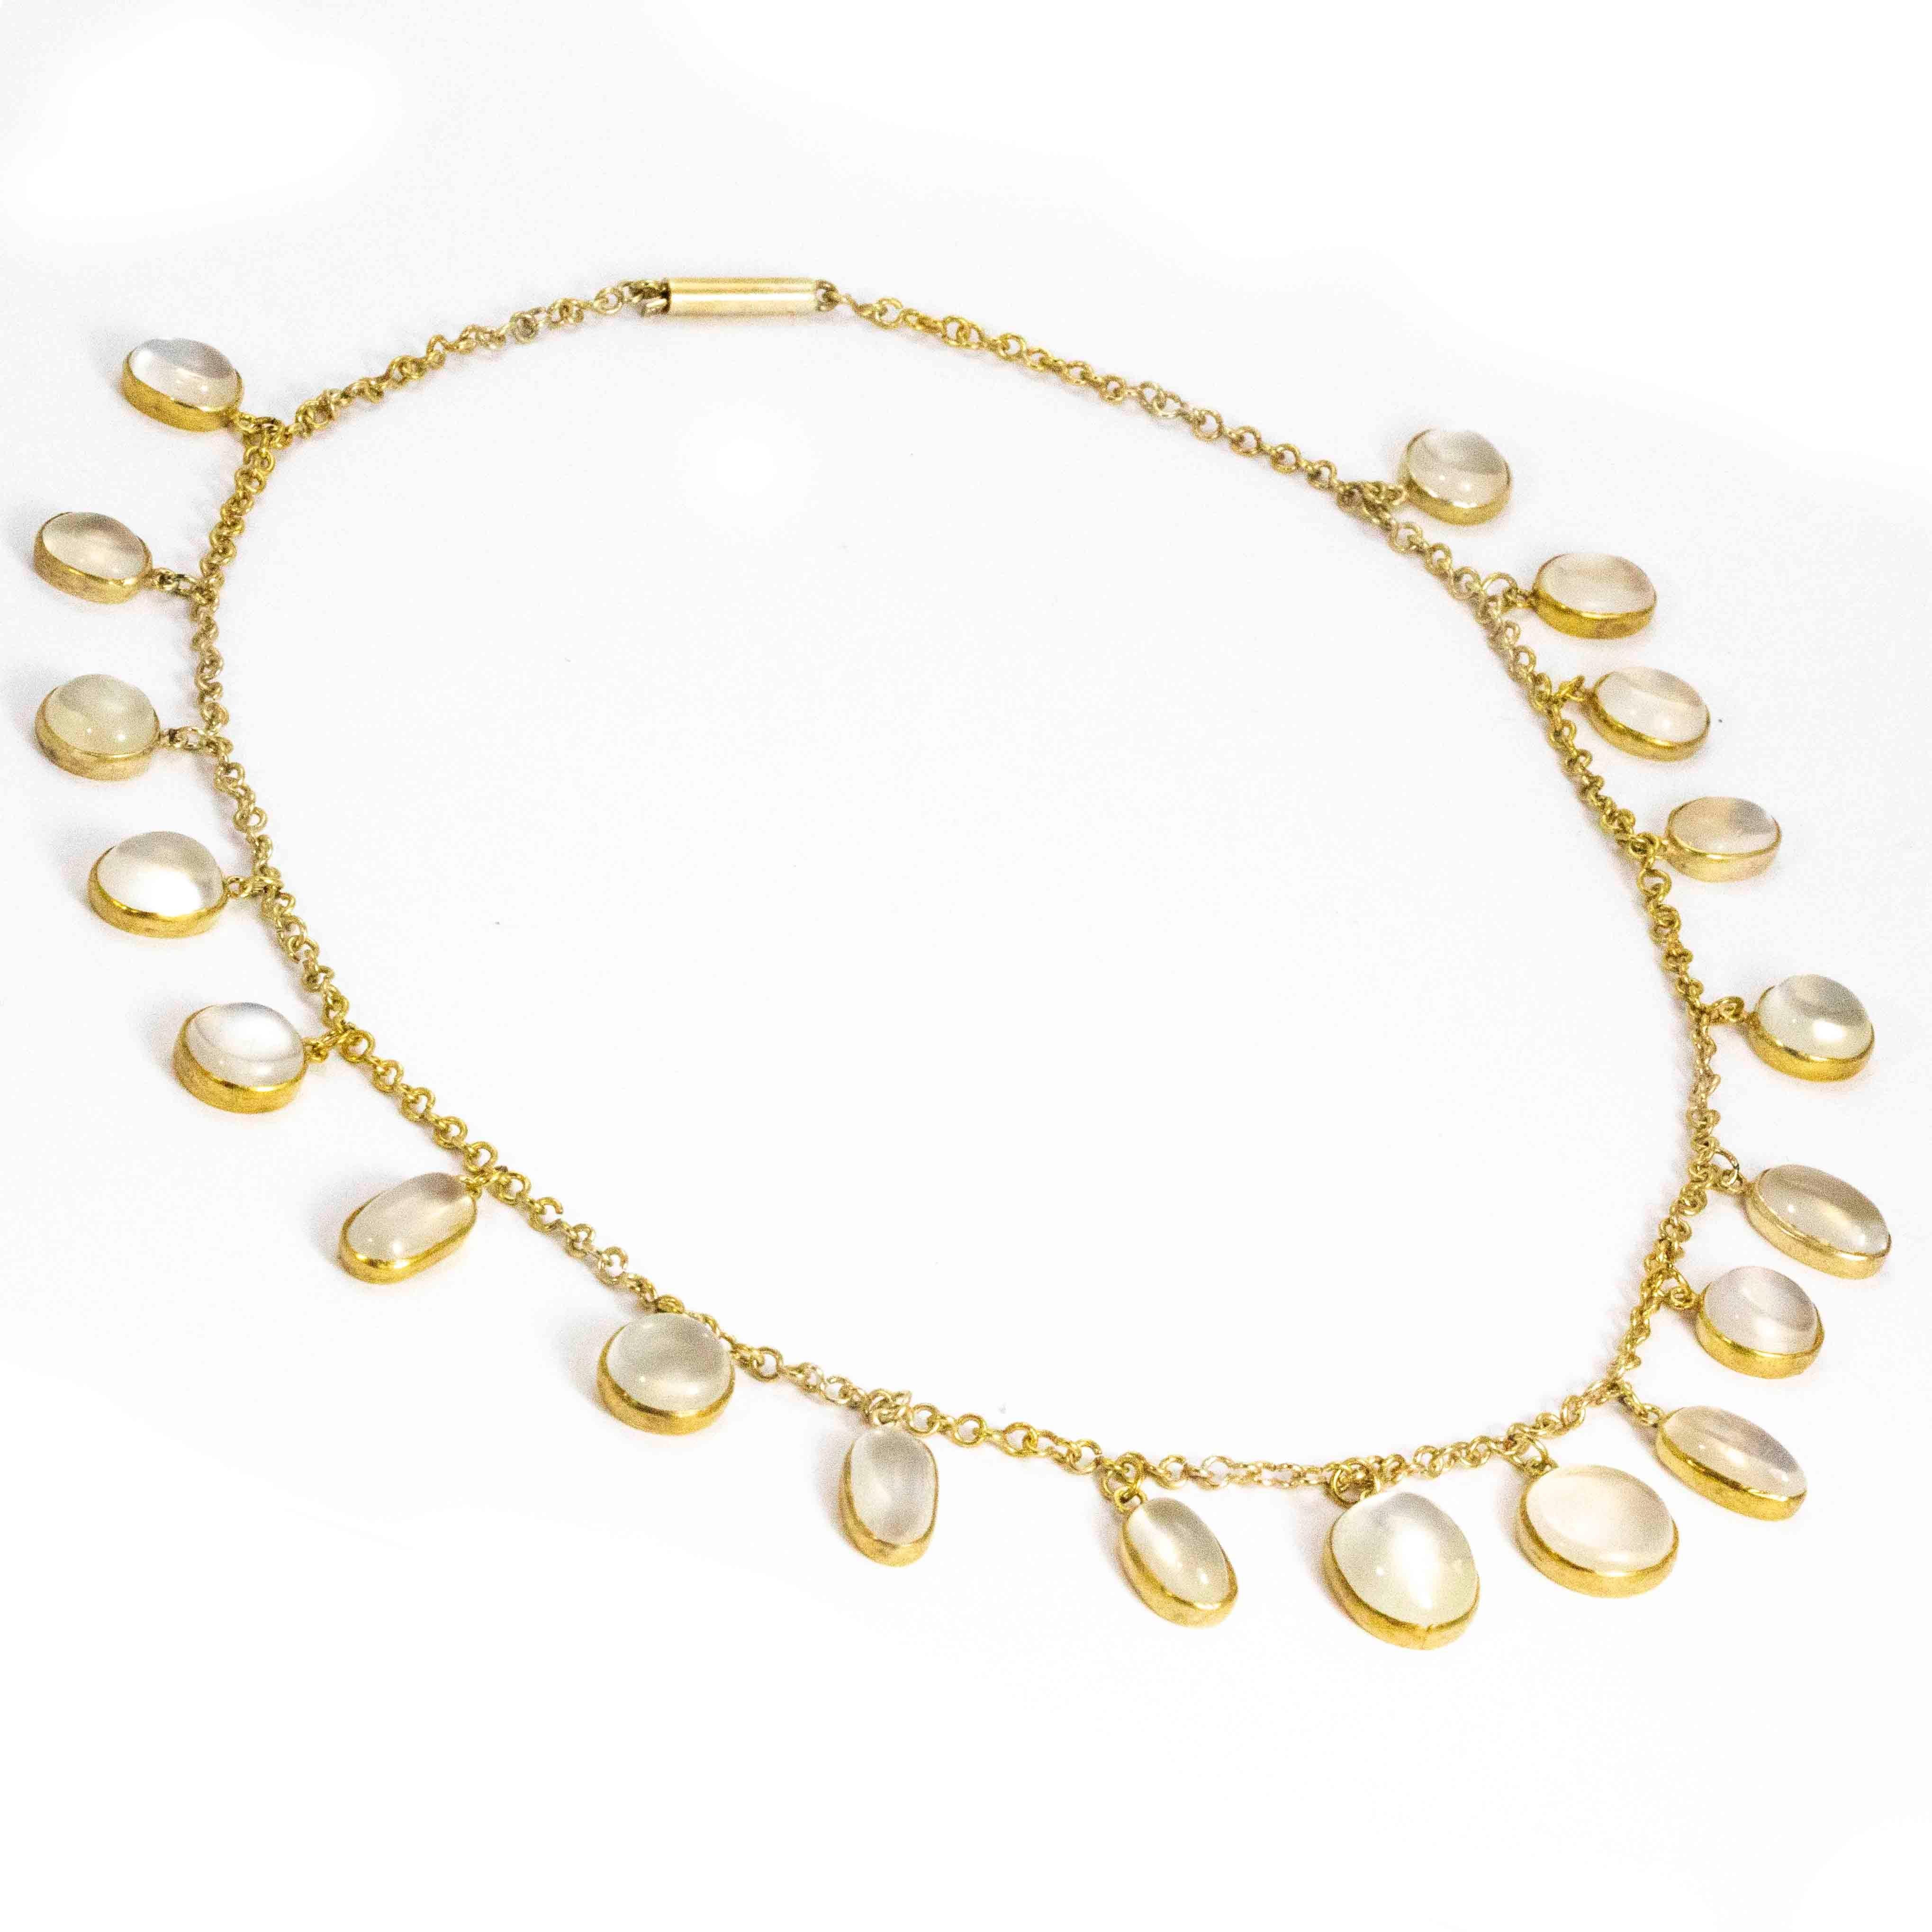 Round Cut Vintage Gilded Moonstone Necklace